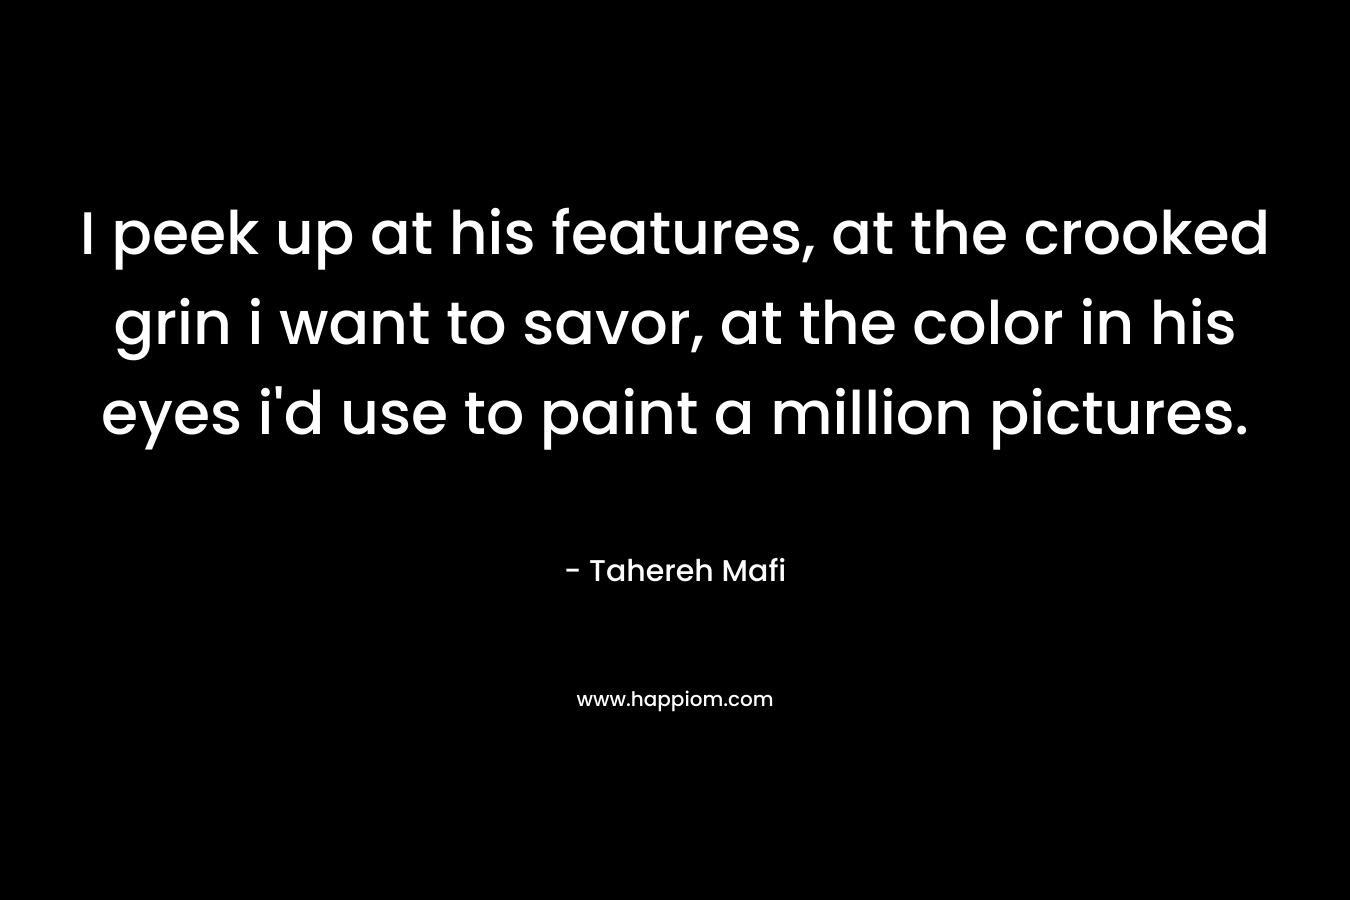 I peek up at his features, at the crooked grin i want to savor, at the color in his eyes i’d use to paint a million pictures. – Tahereh Mafi